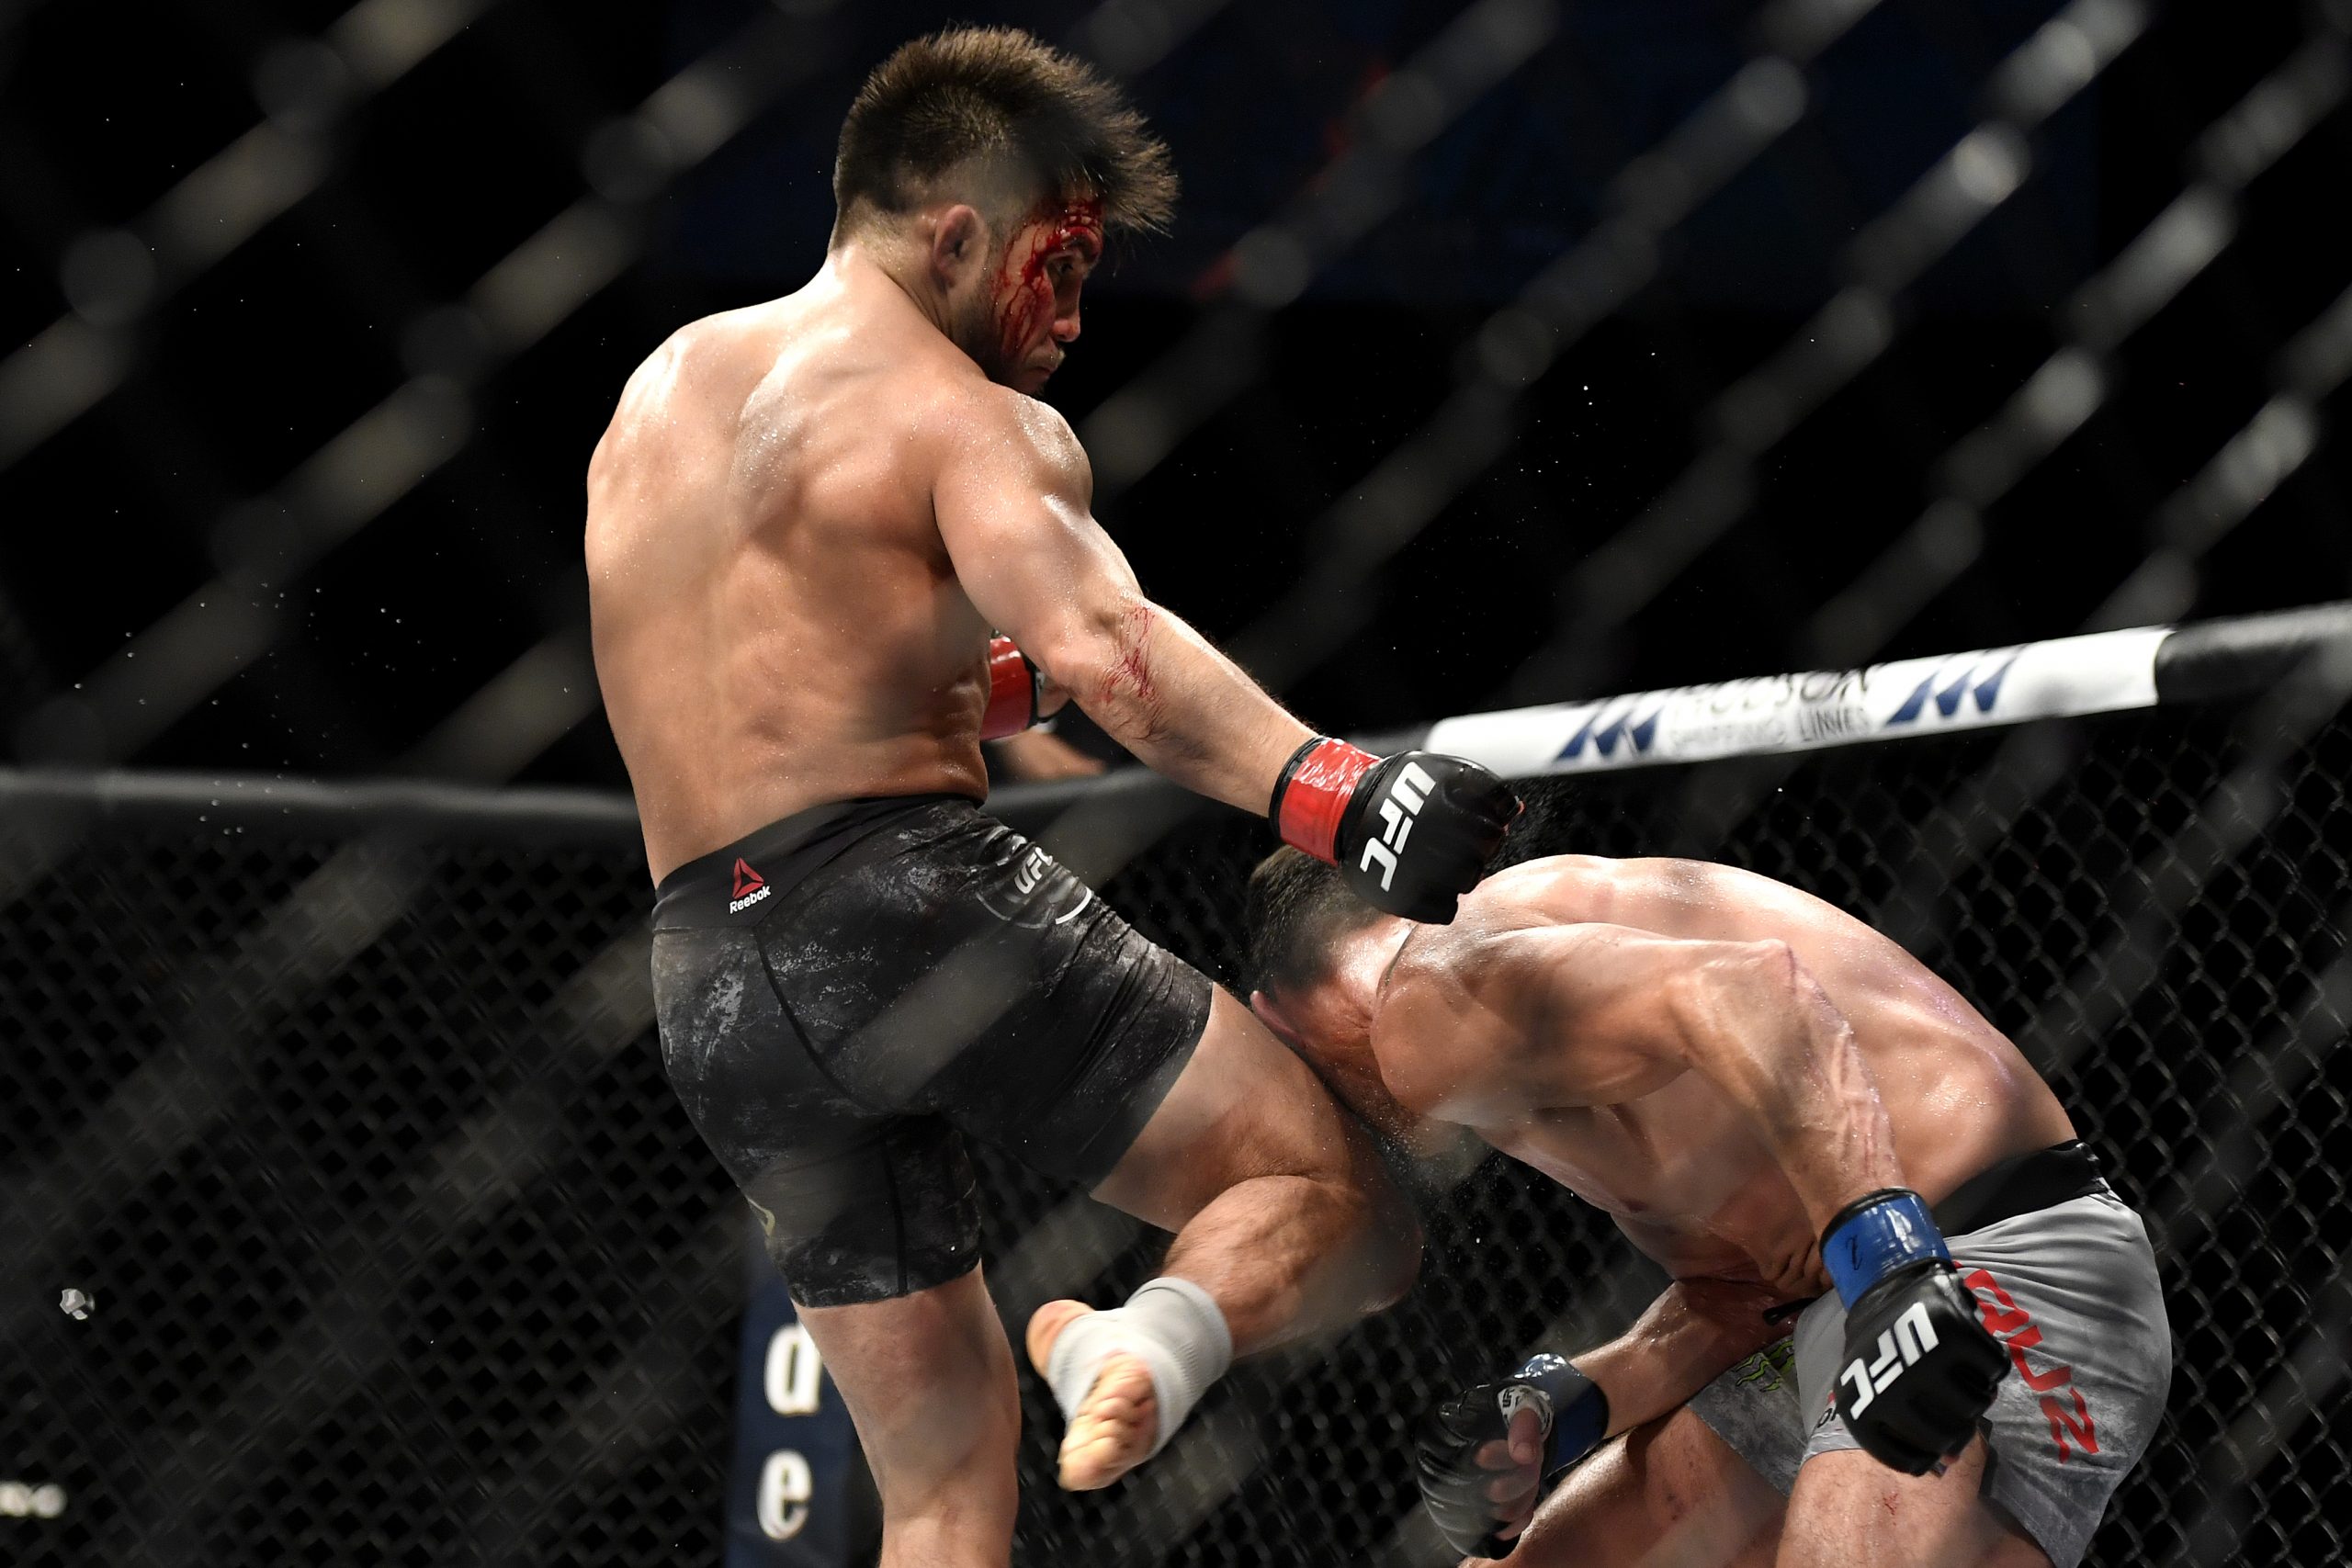 Henry Cejudo vs Dominick Cruz was one of the top fights at UFC 249